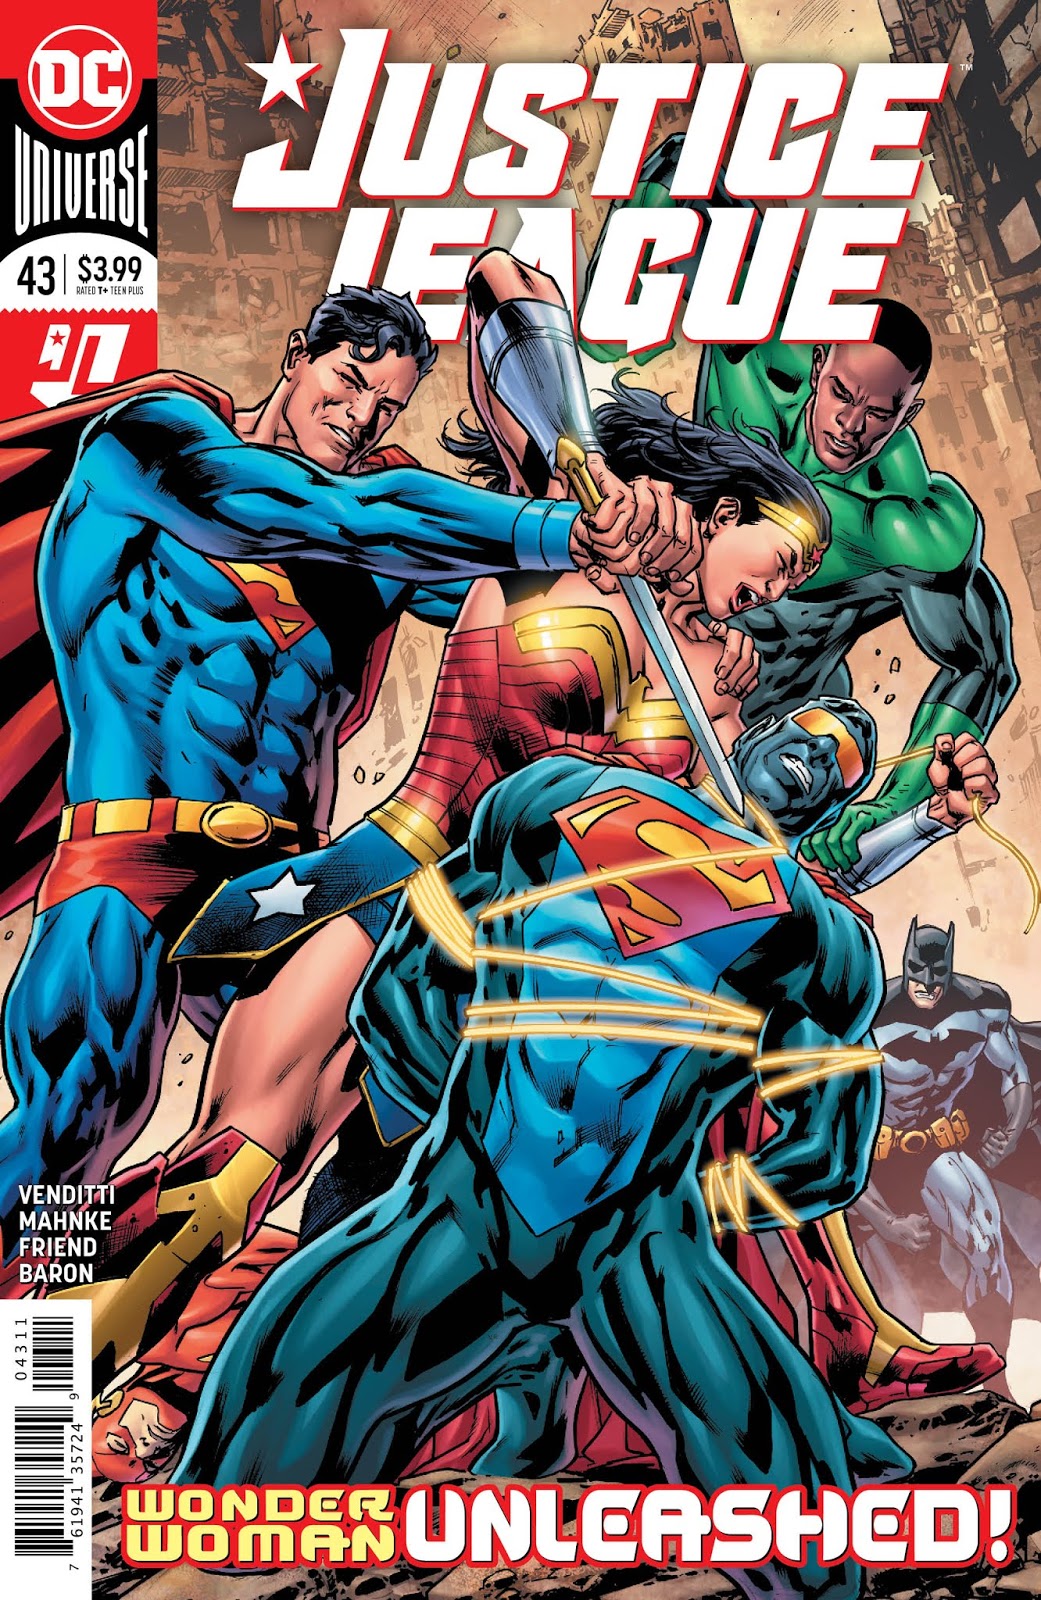 Weird Science DC Comics: Justice League #43 Review